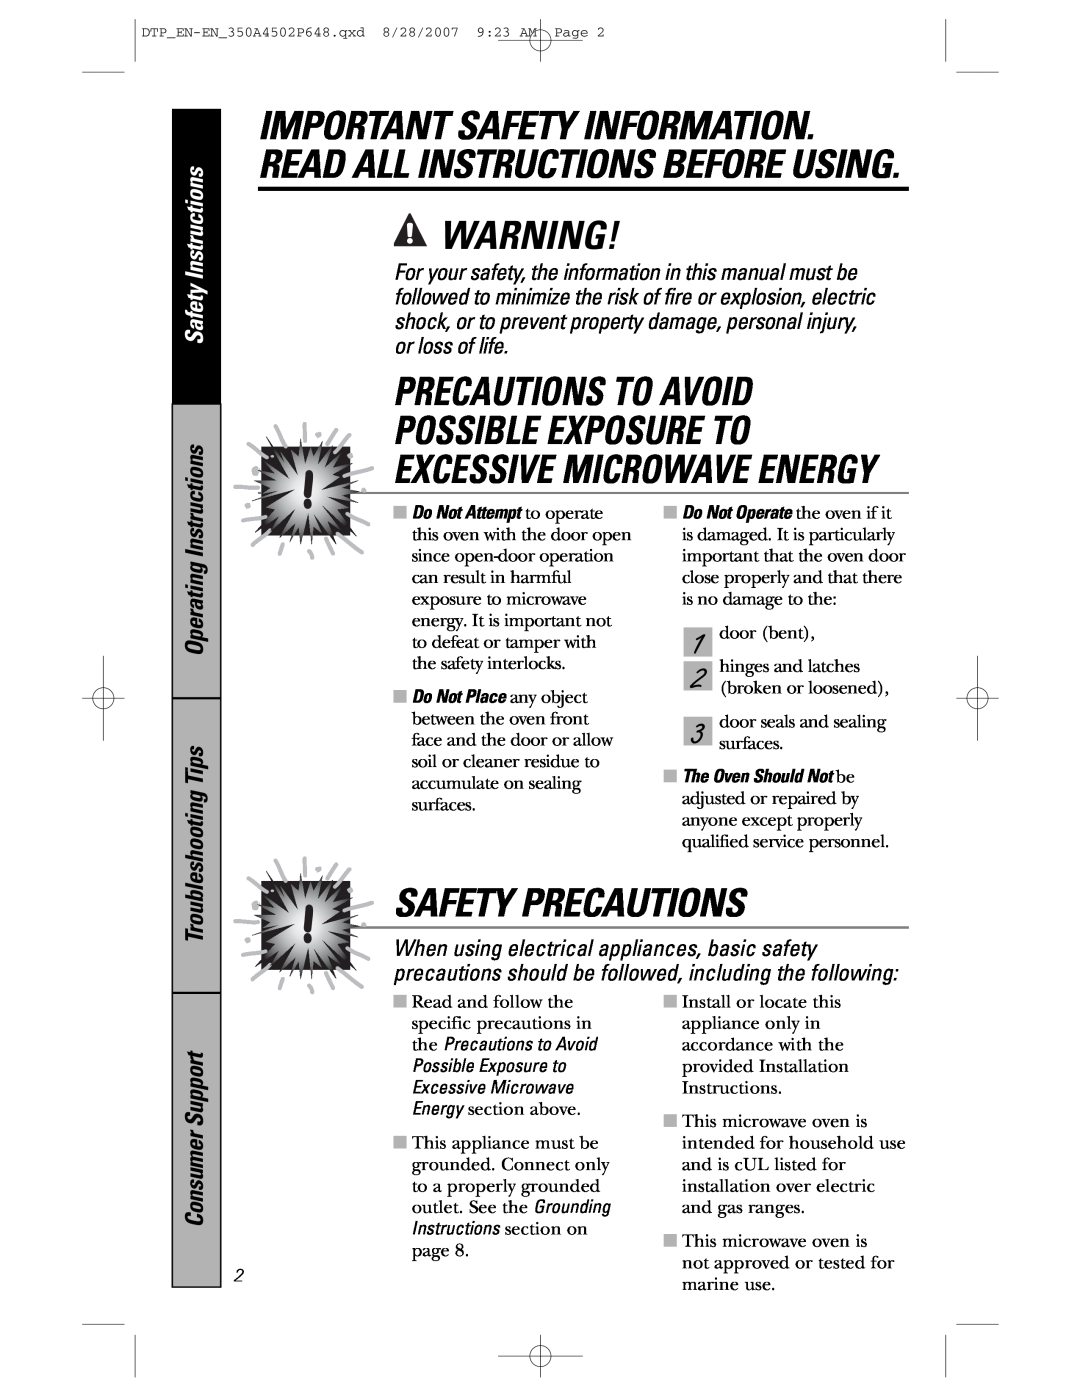 GE pvm1870 Precautions To Avoid Possible Exposure To, Excessive Microwave Energy, Safety Precautions, Safety Instructions 